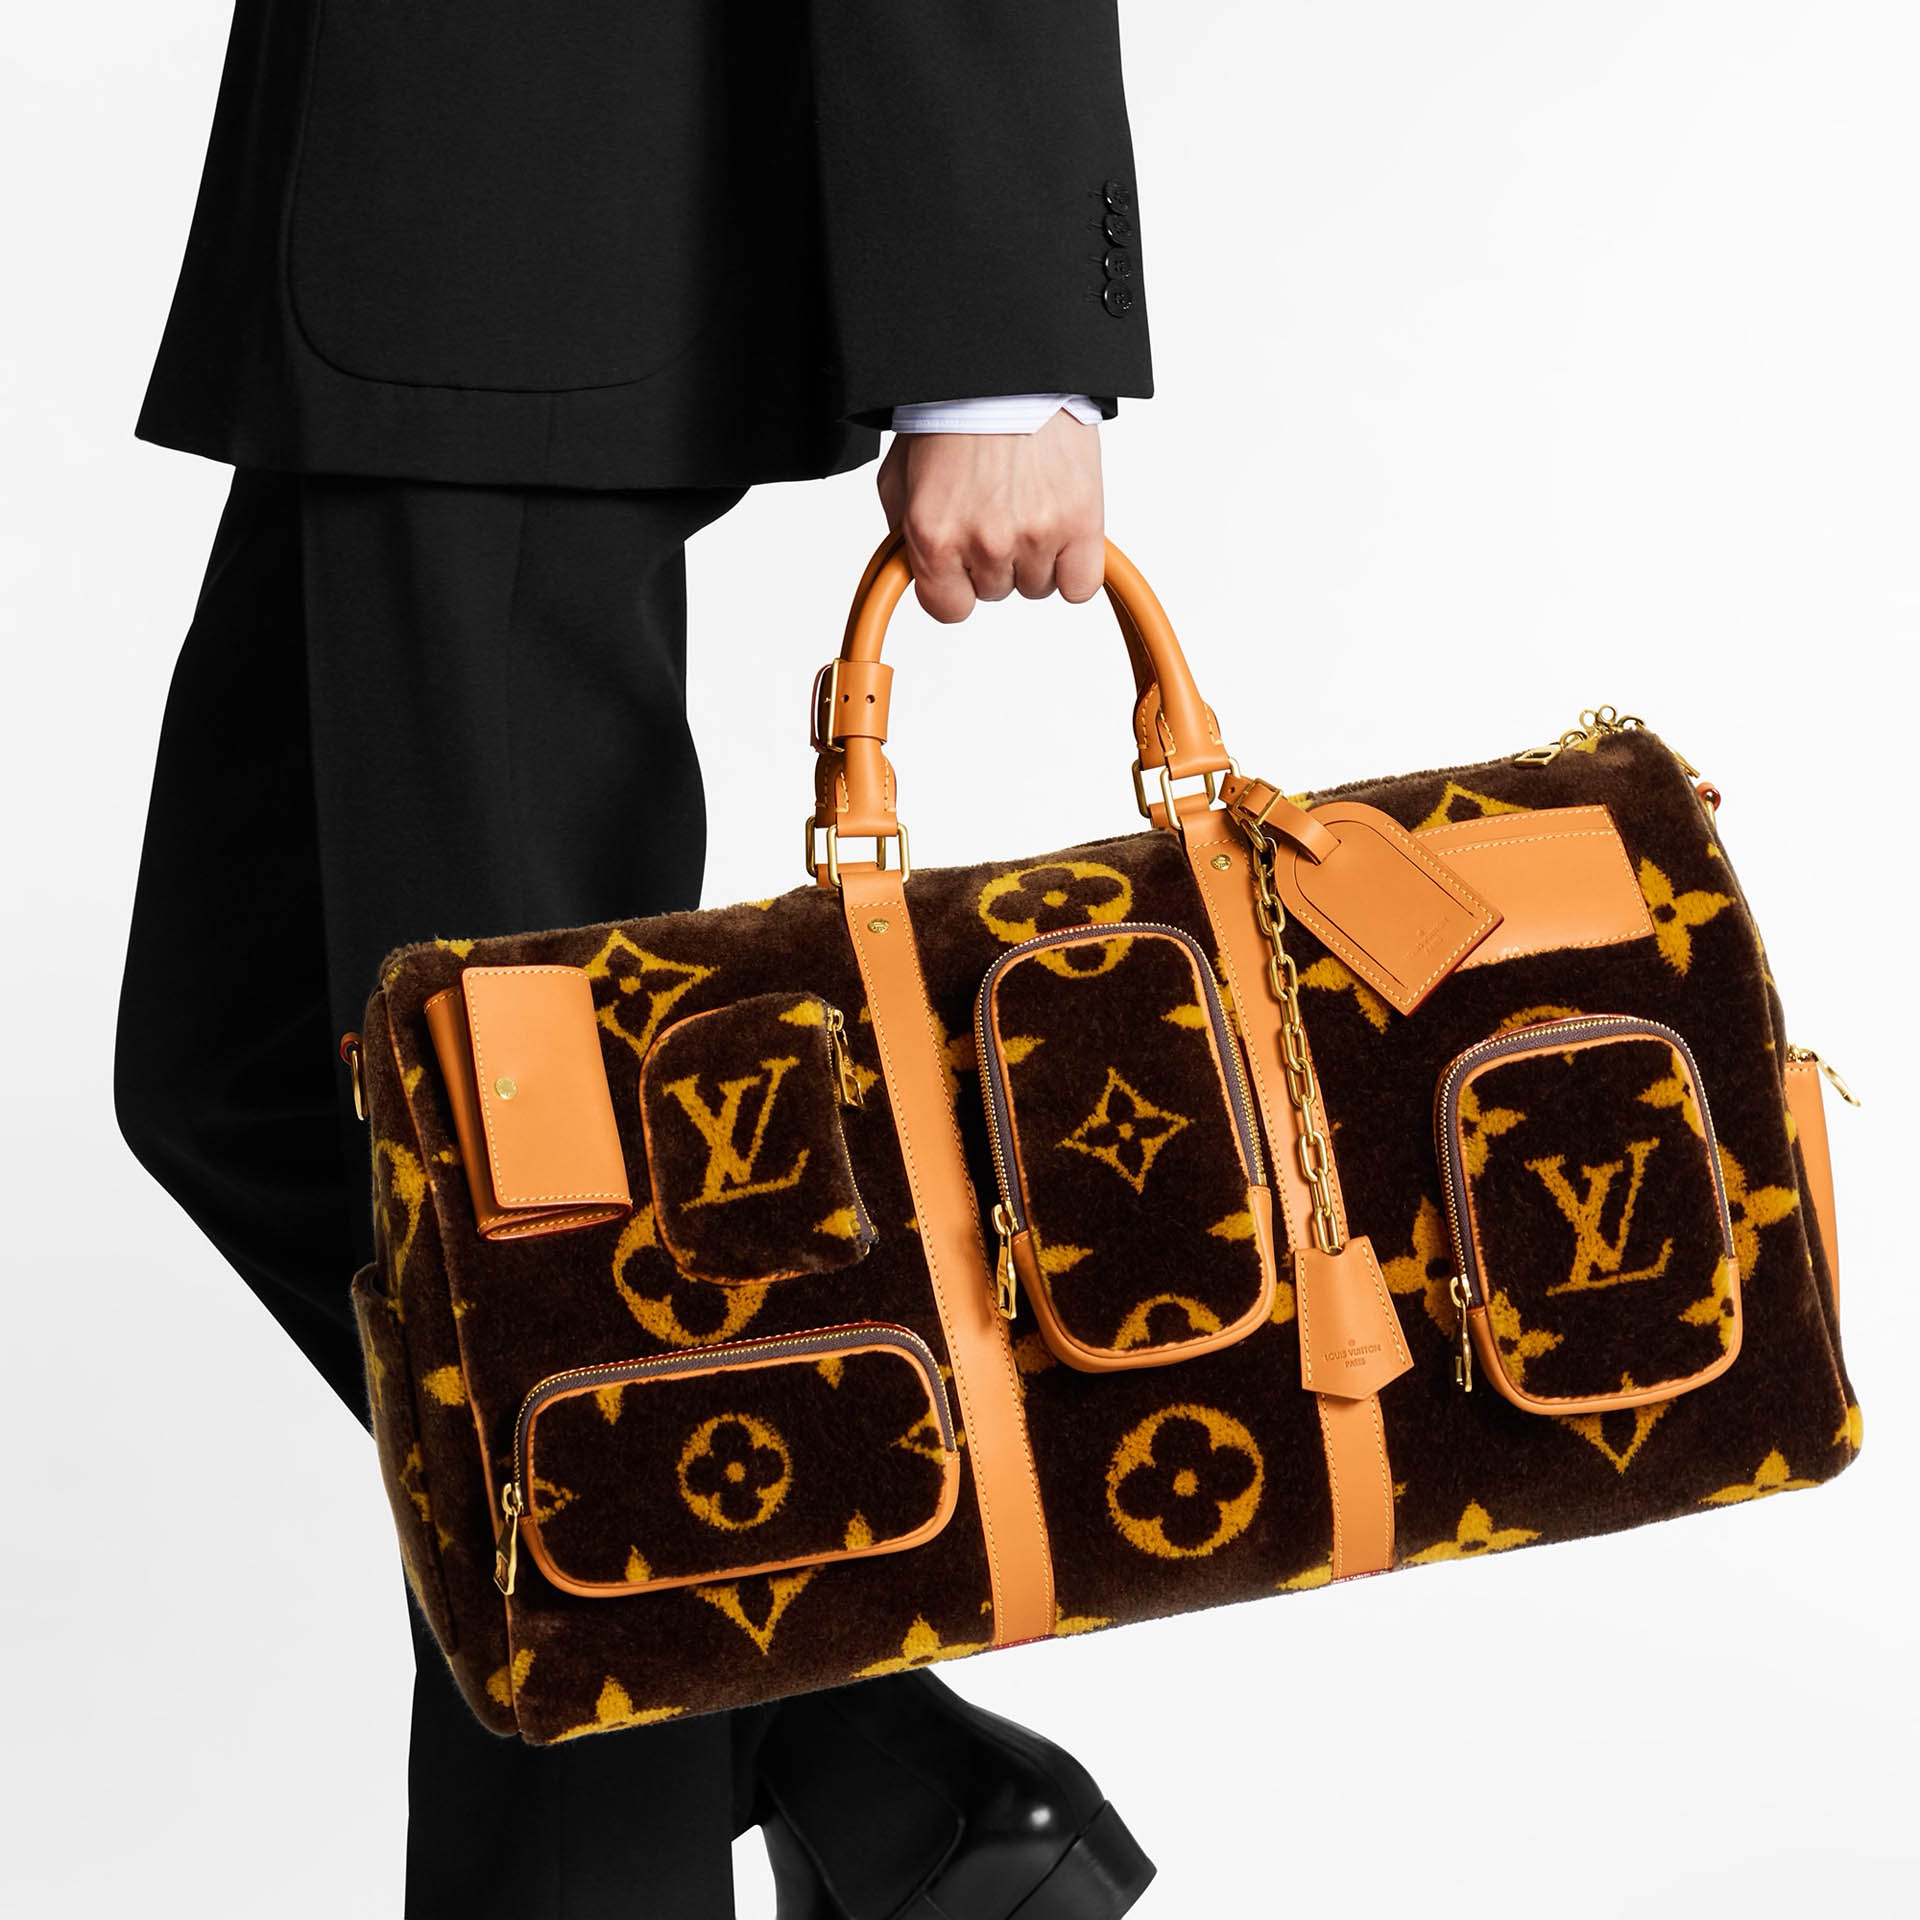 Virgil Abloh's Designs for Louis Vuitton Iconic Leather Goods